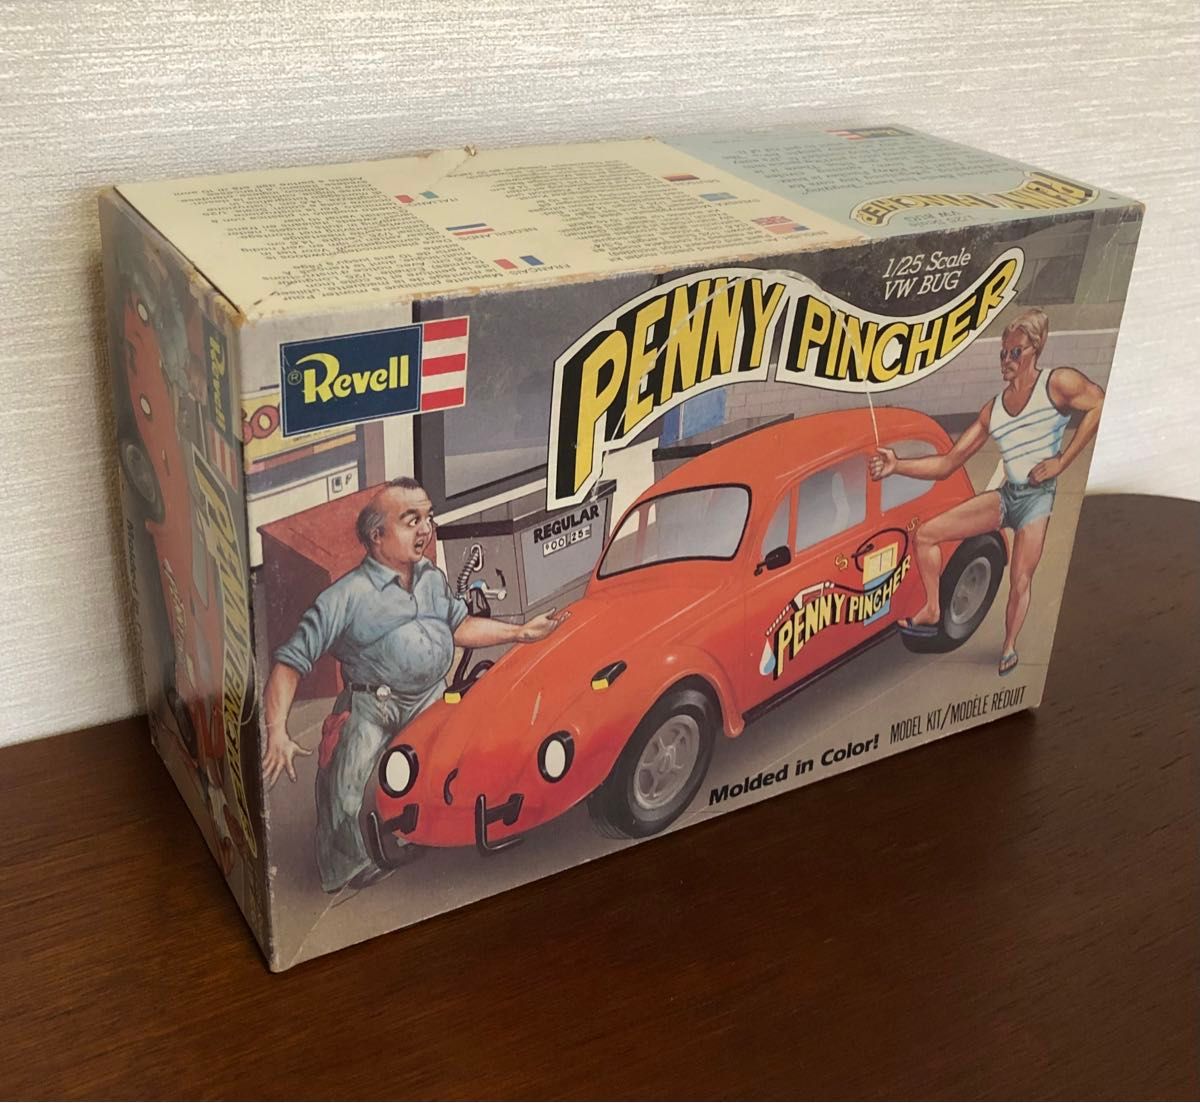 Revell  PENNY PINCHER  ＶＷ　BUG  1/25  MODEL KIT   MADE IN U.S.A.